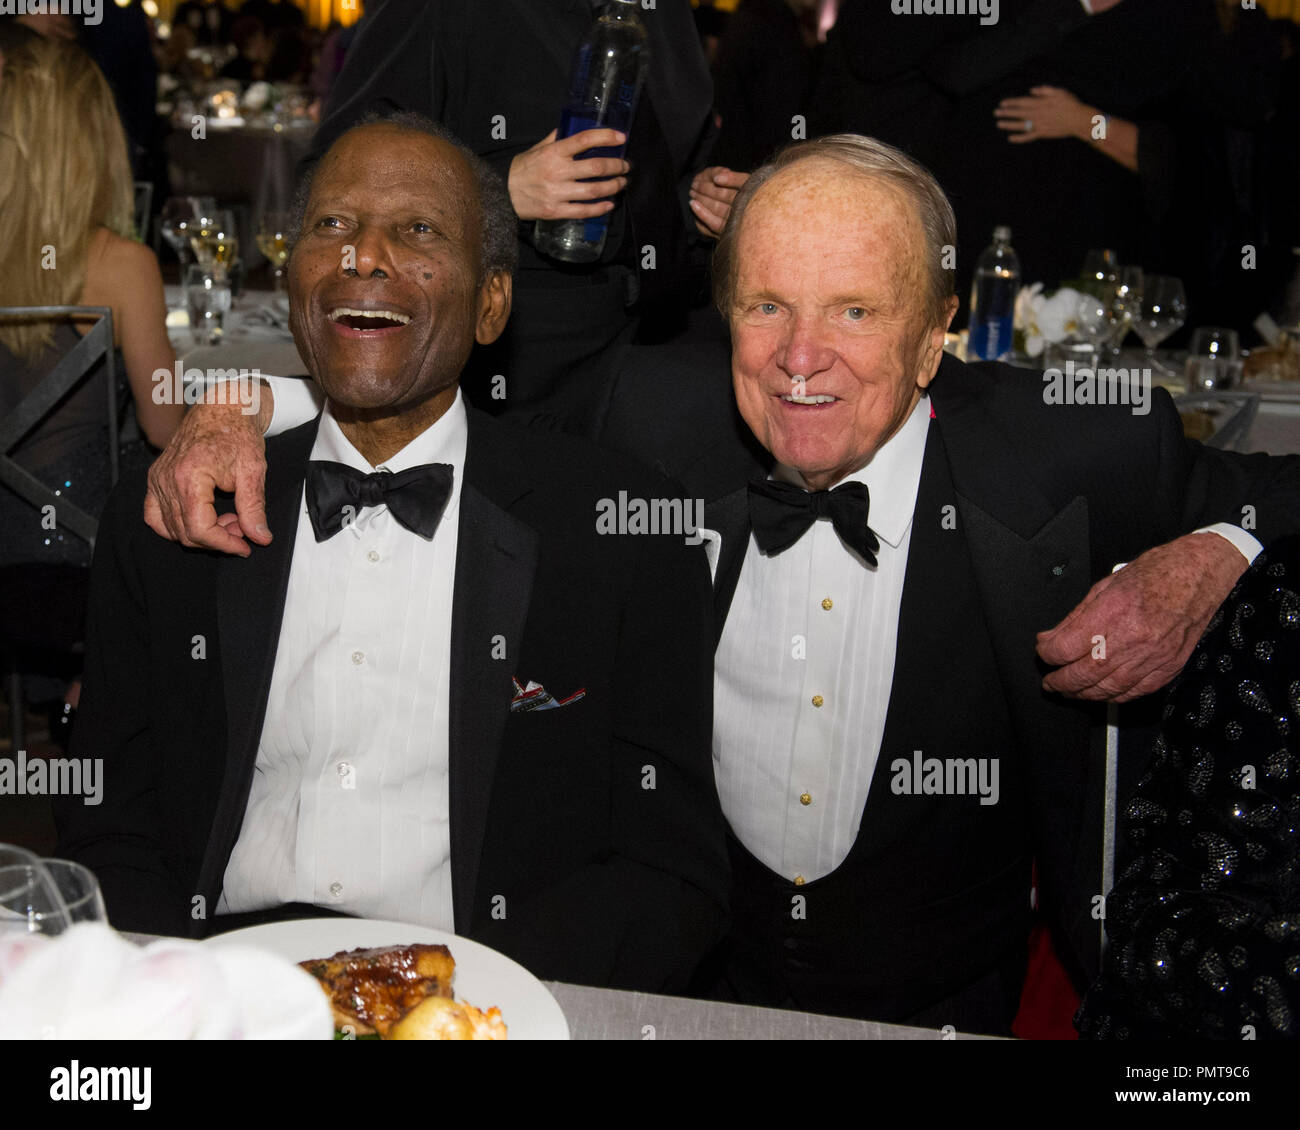 Oscar®-winning actor Sidney Poitier (left) and Honorary Award recipient George Stevens Jr. attend the 2012 Governors Awards at The Ray Dolby Ballroom at Hollywood & Highland Center® in Hollywood, CA, Saturday, December 1.  File Reference # 31744 044  For Editorial Use Only -  All Rights Reserved Stock Photo